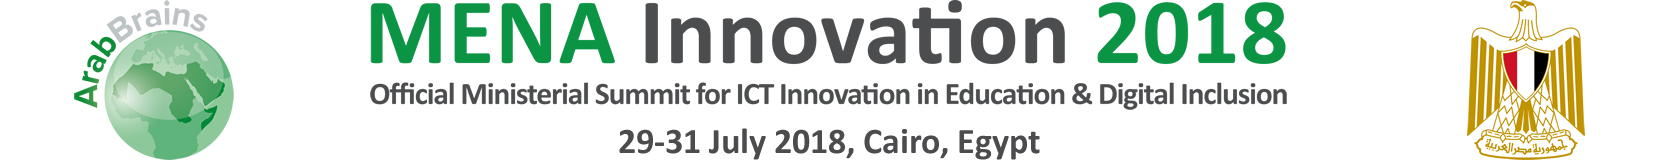 MENA Innovation 2018 - Official Ministerial Summit for ICT Innovation in Education & Digital Inclusion